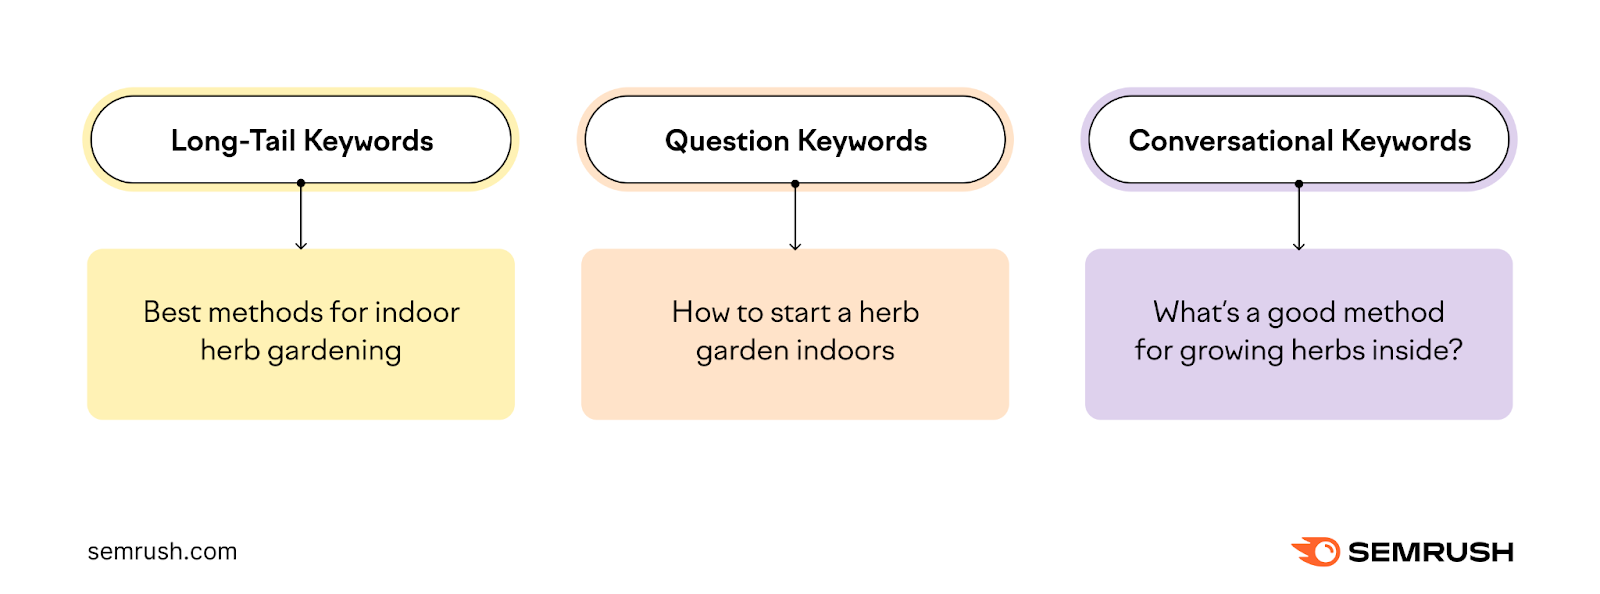 Long-tail, question, and conversational keywords explained